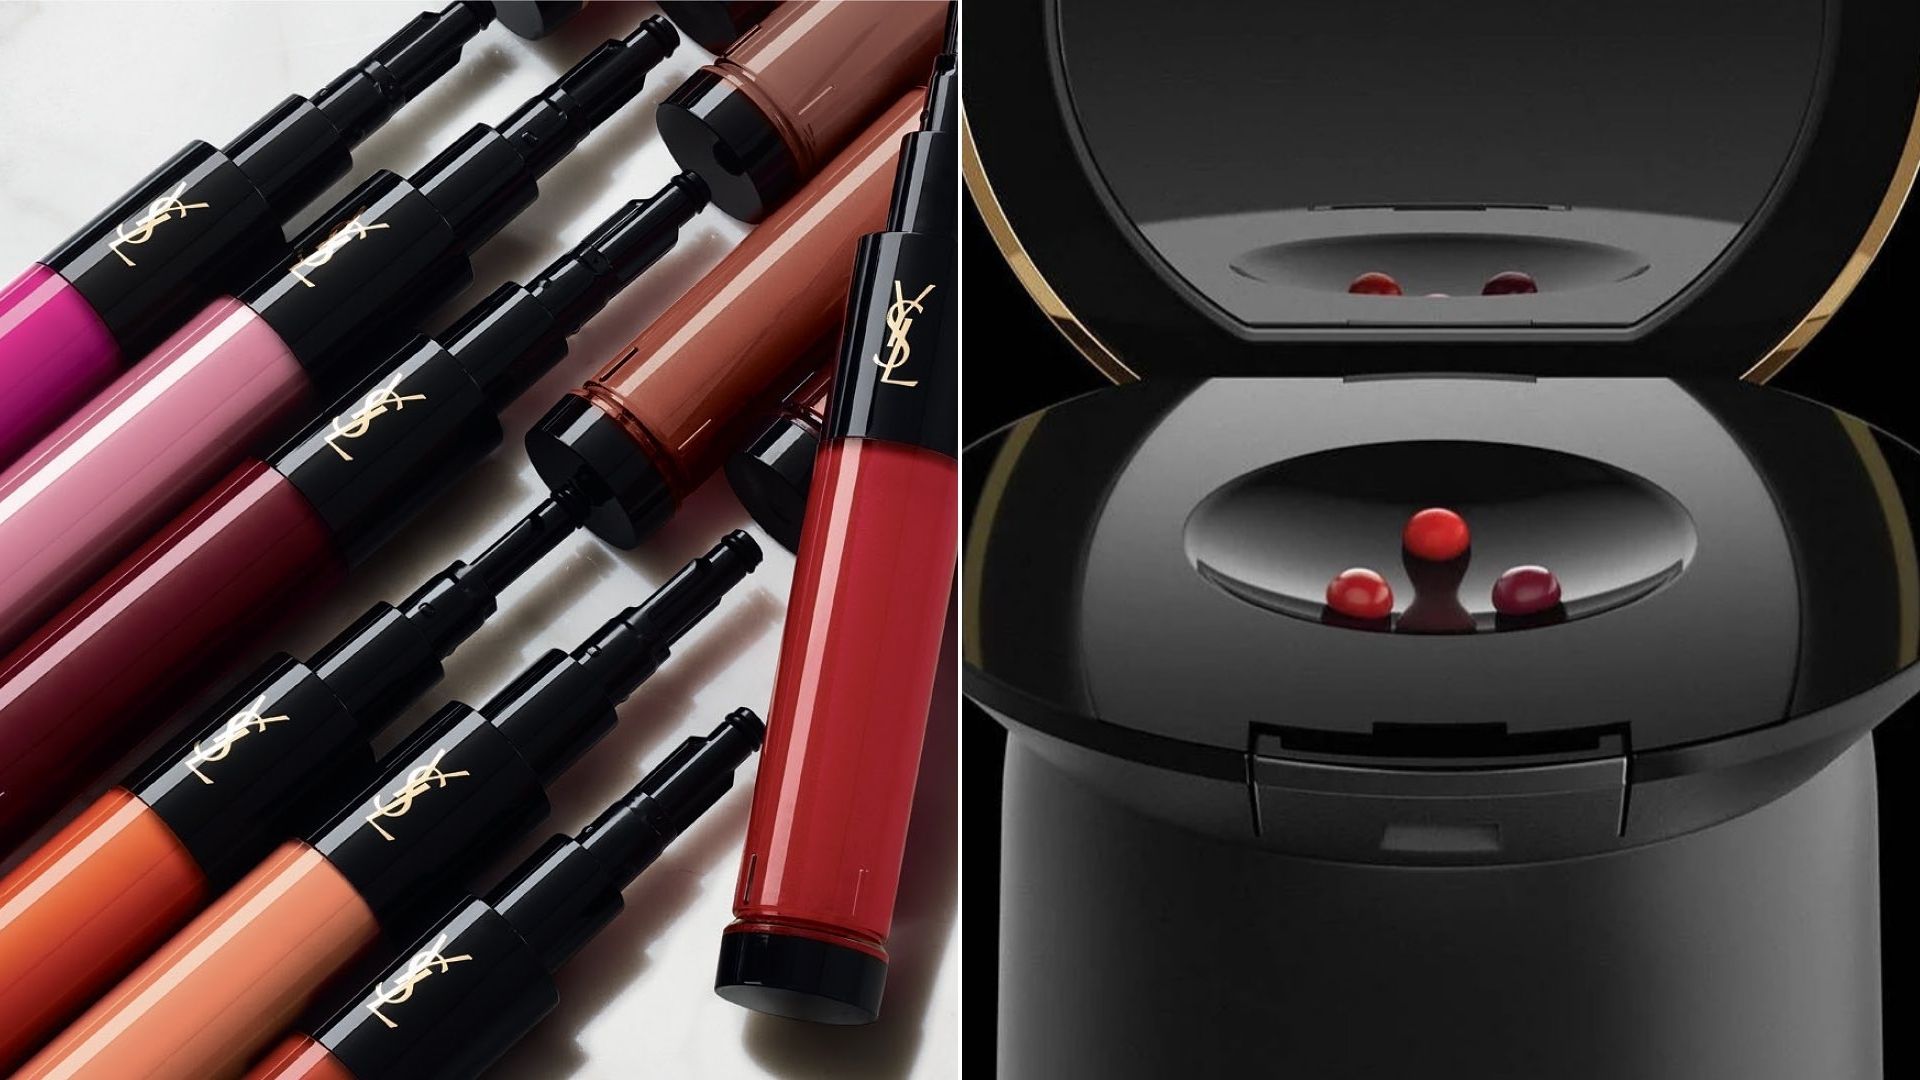 The YSL Rouge Sur Mesure Machine Can Make Any Lipstick Shade